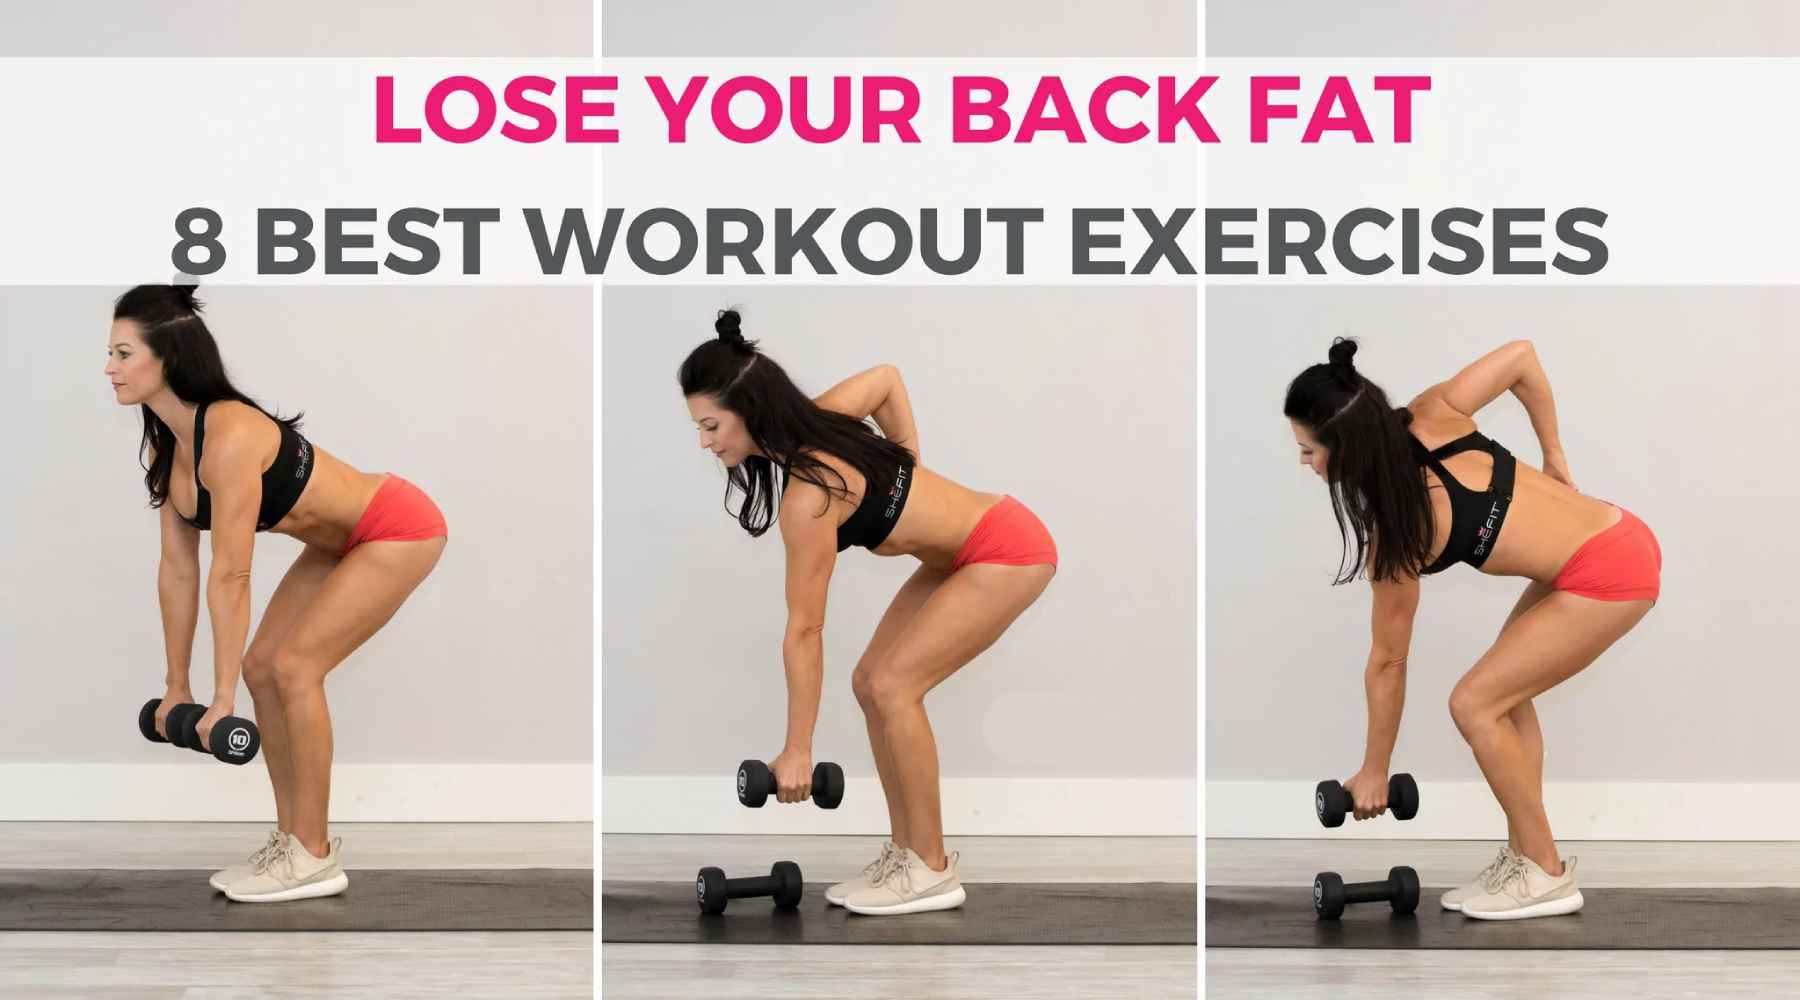 Want a Slim, Toned Body for Good? Do This Machine Workout